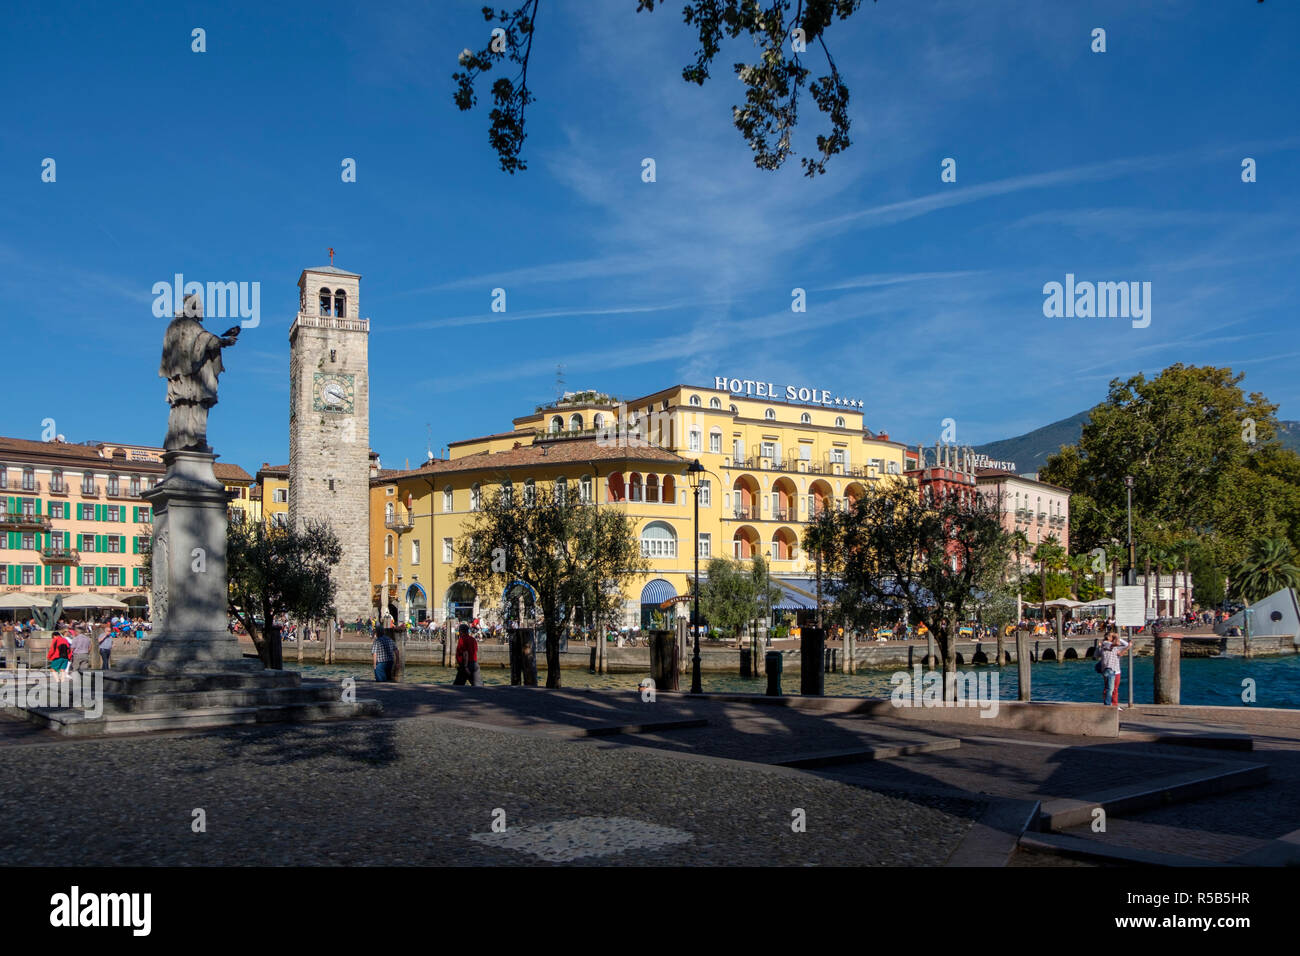 Waterfront with the Torre Apponale, Riva del Garda, Trentino, Italy Stock Photo